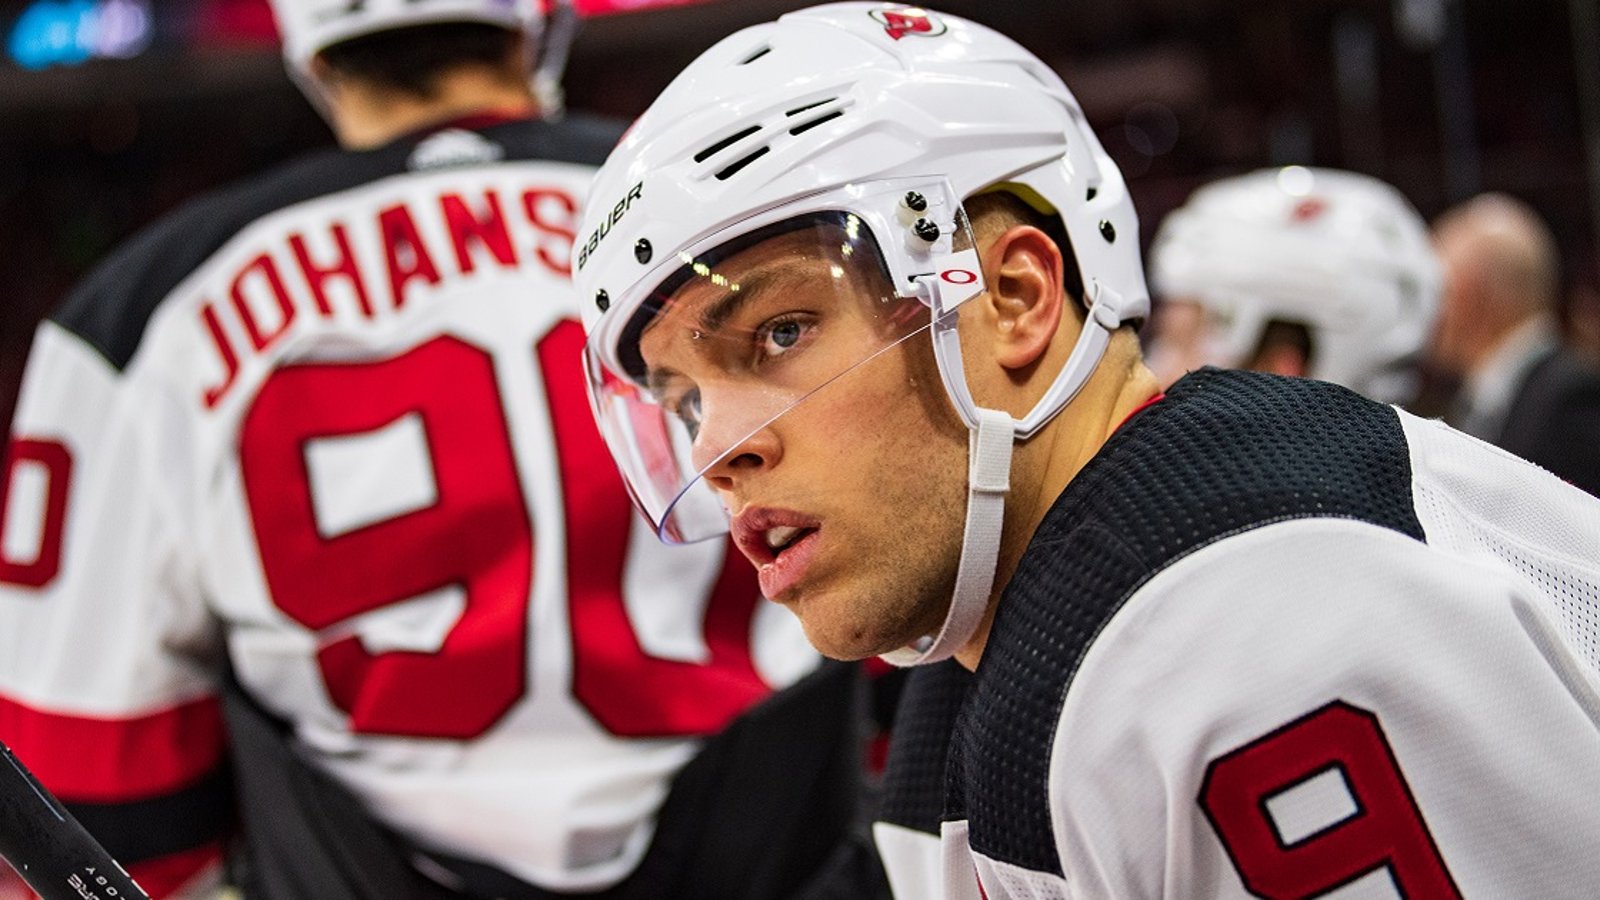 Taylor Hall comments on his future in the NHL.